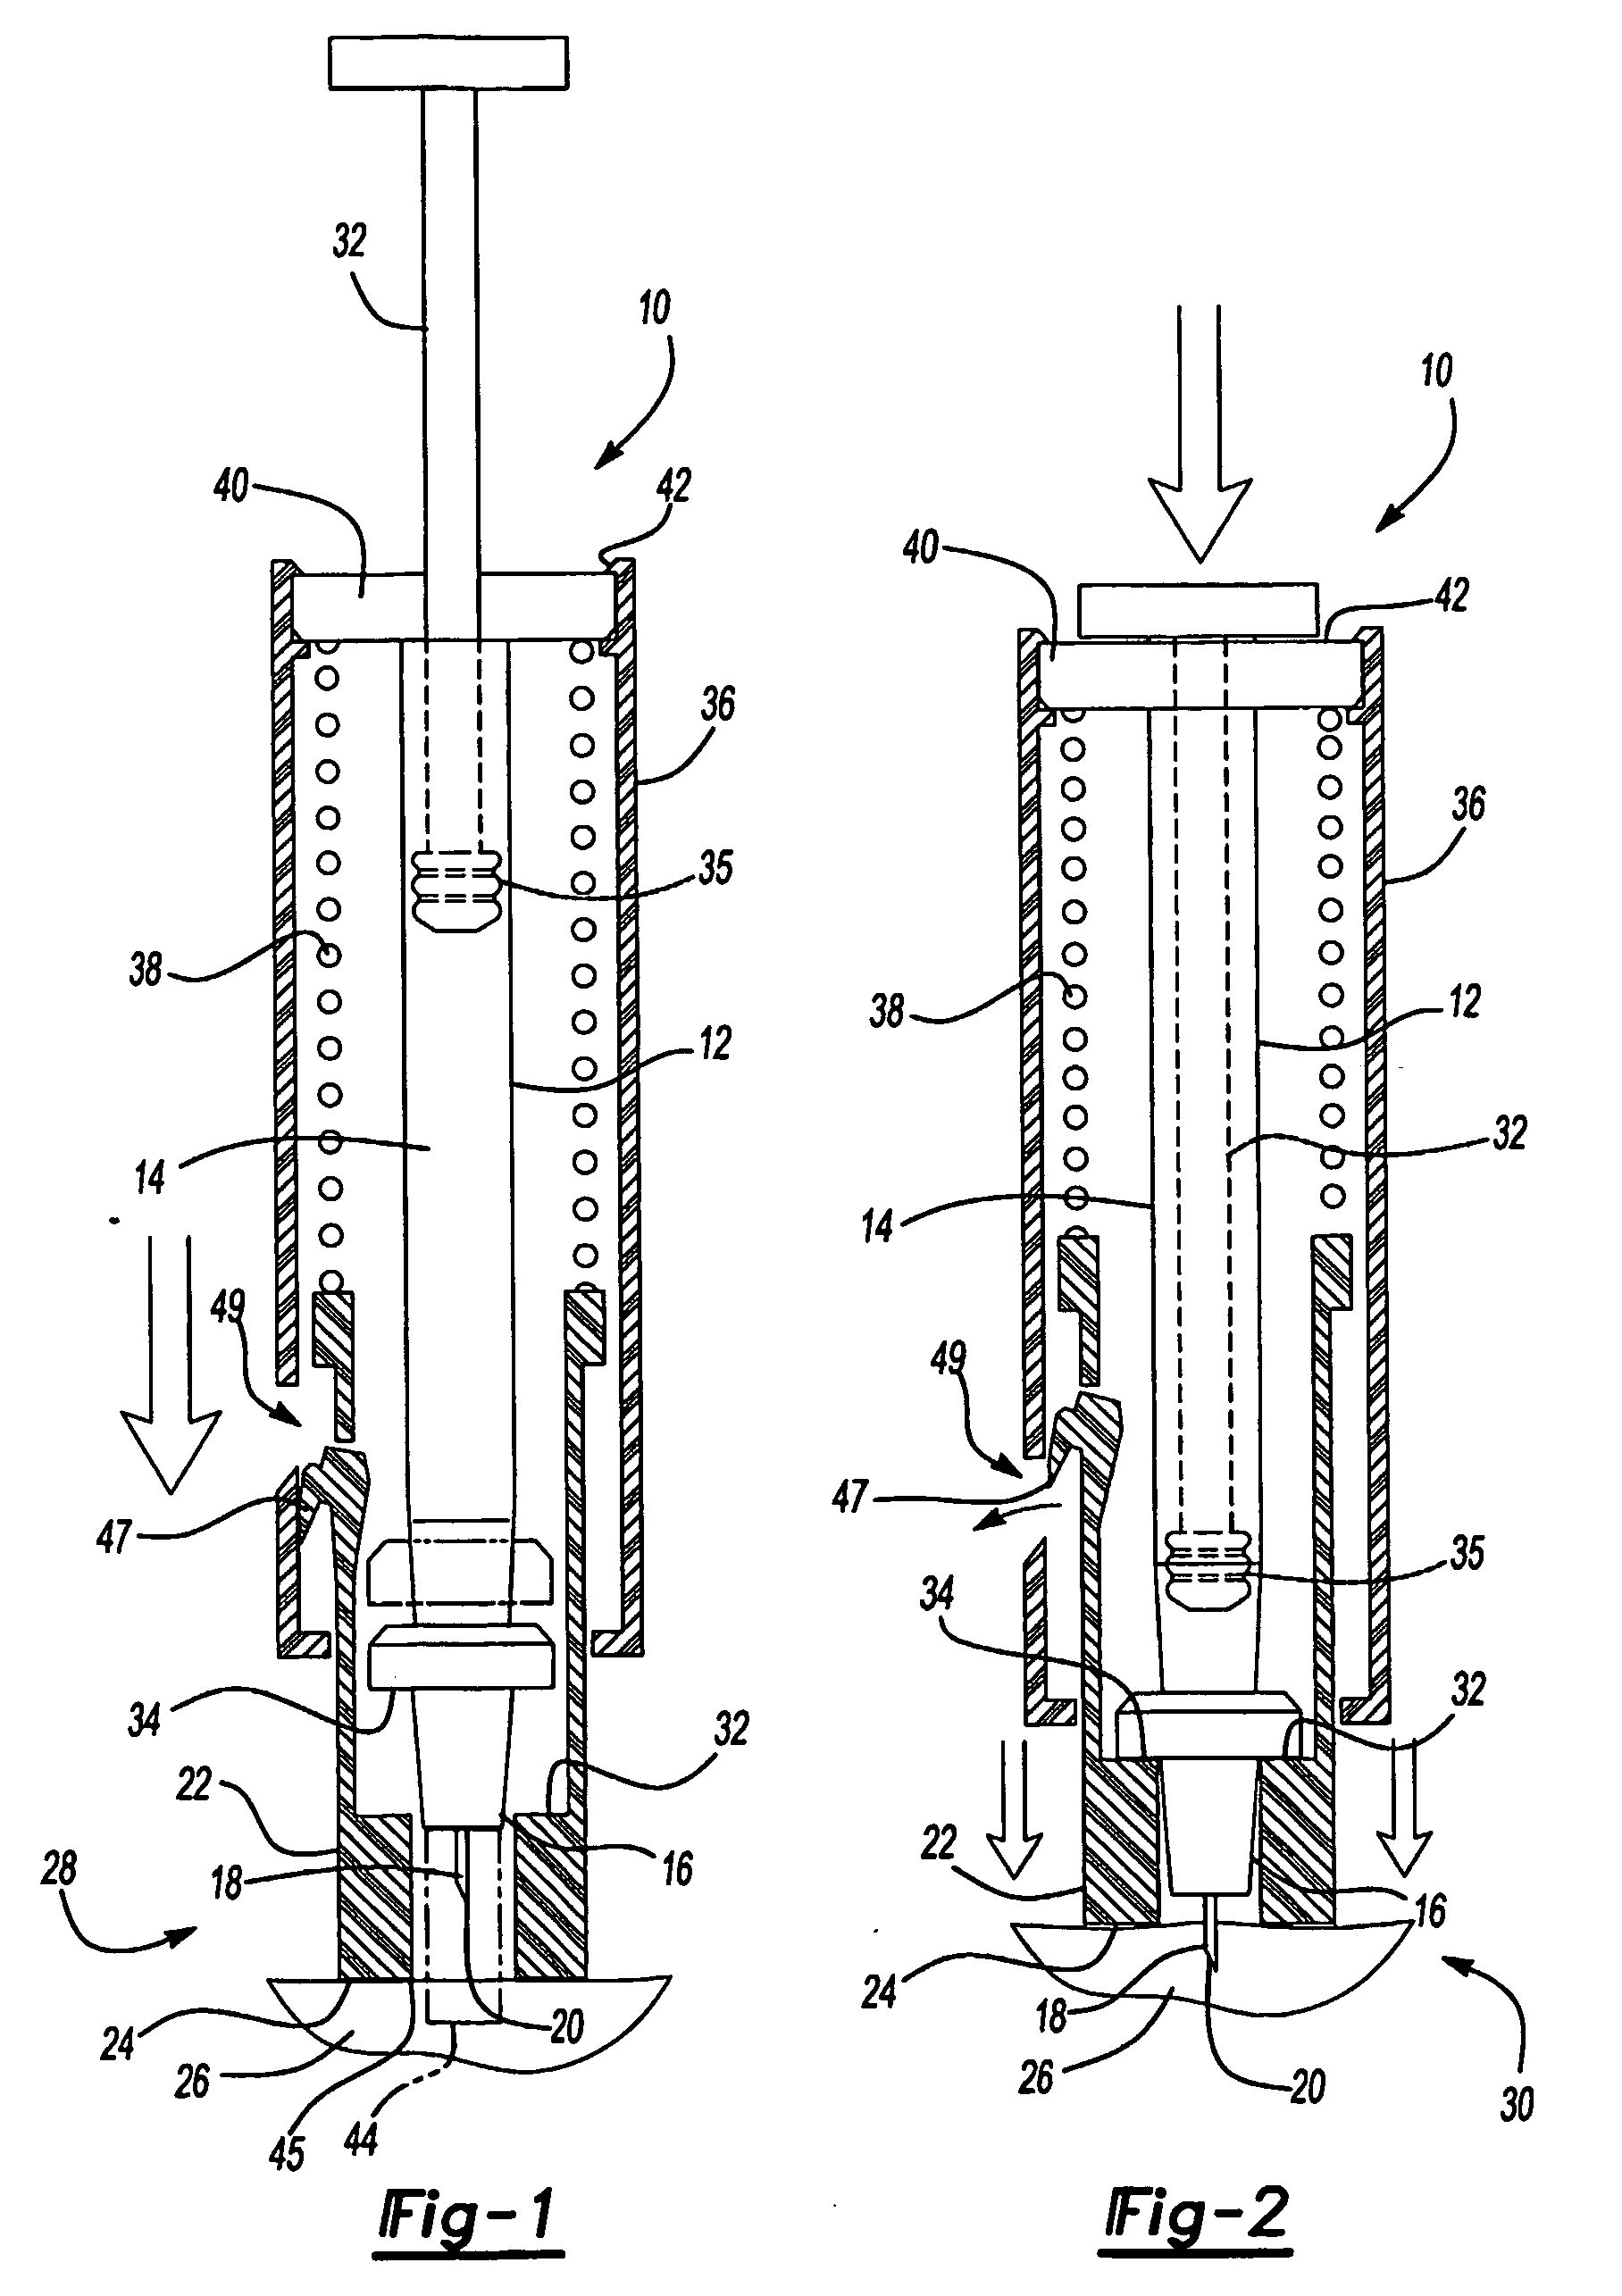 Prefillable intradermal delivery device with hidden needle and passive shielding